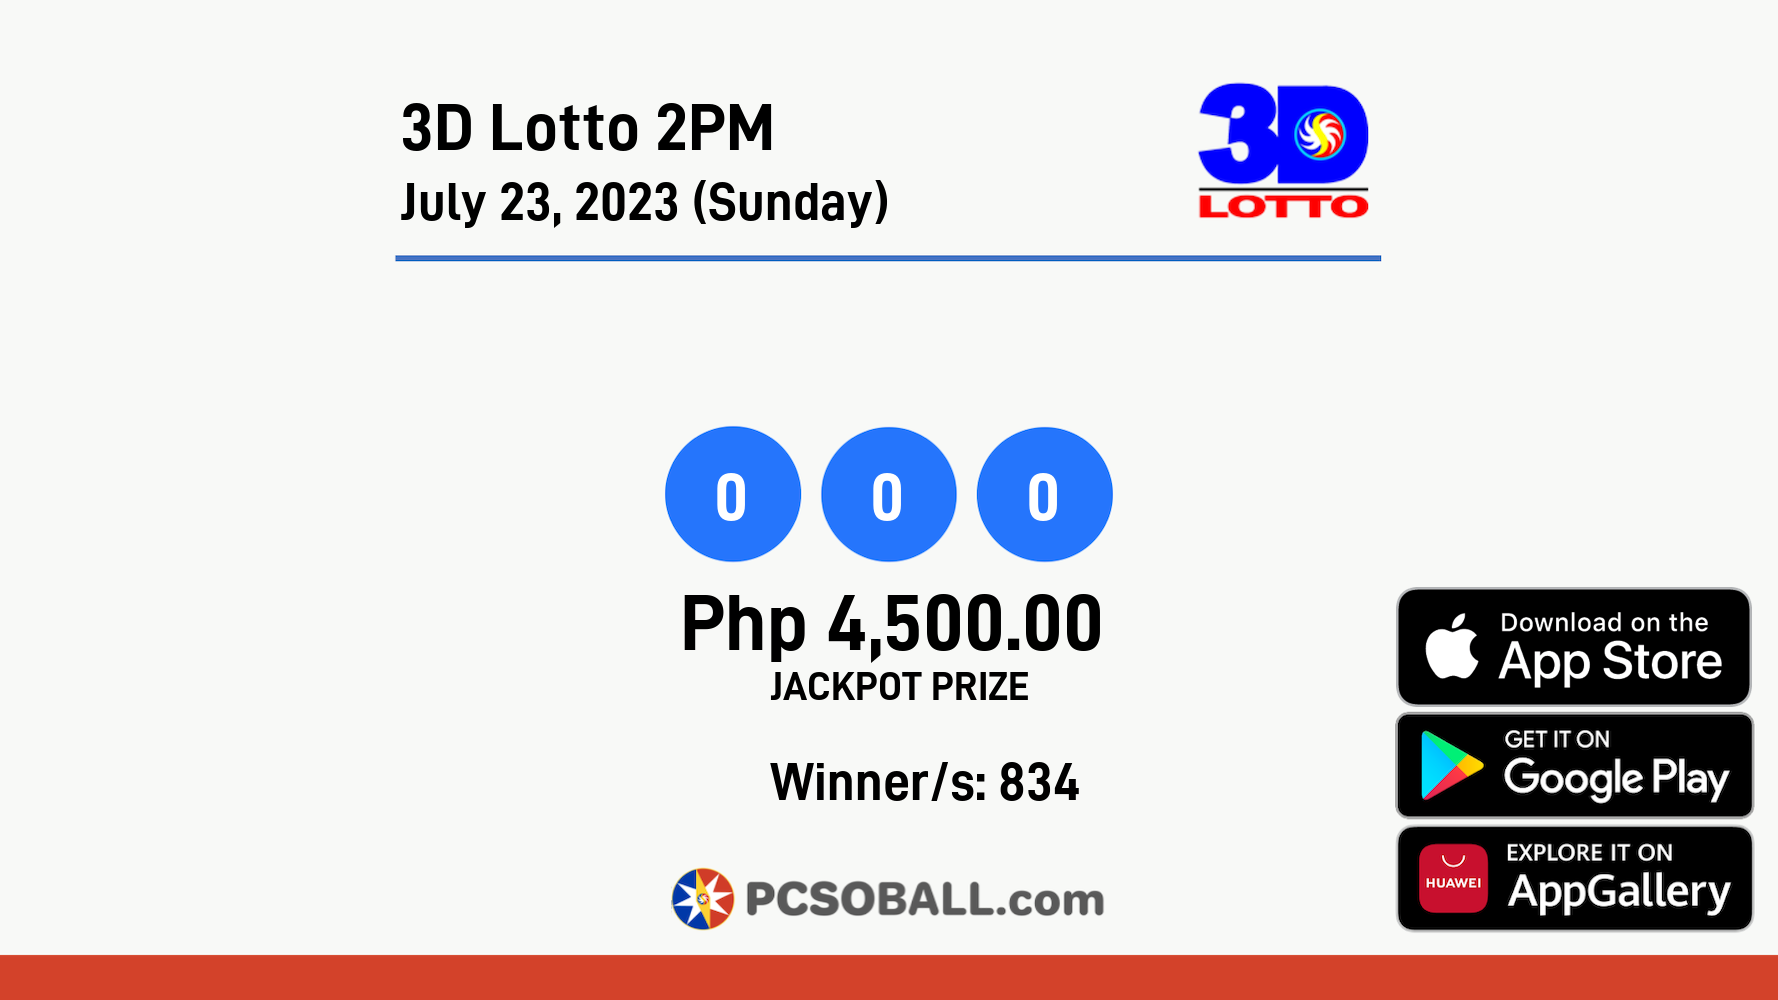 3D Lotto 2PM July 23, 2023 (Sunday) Result